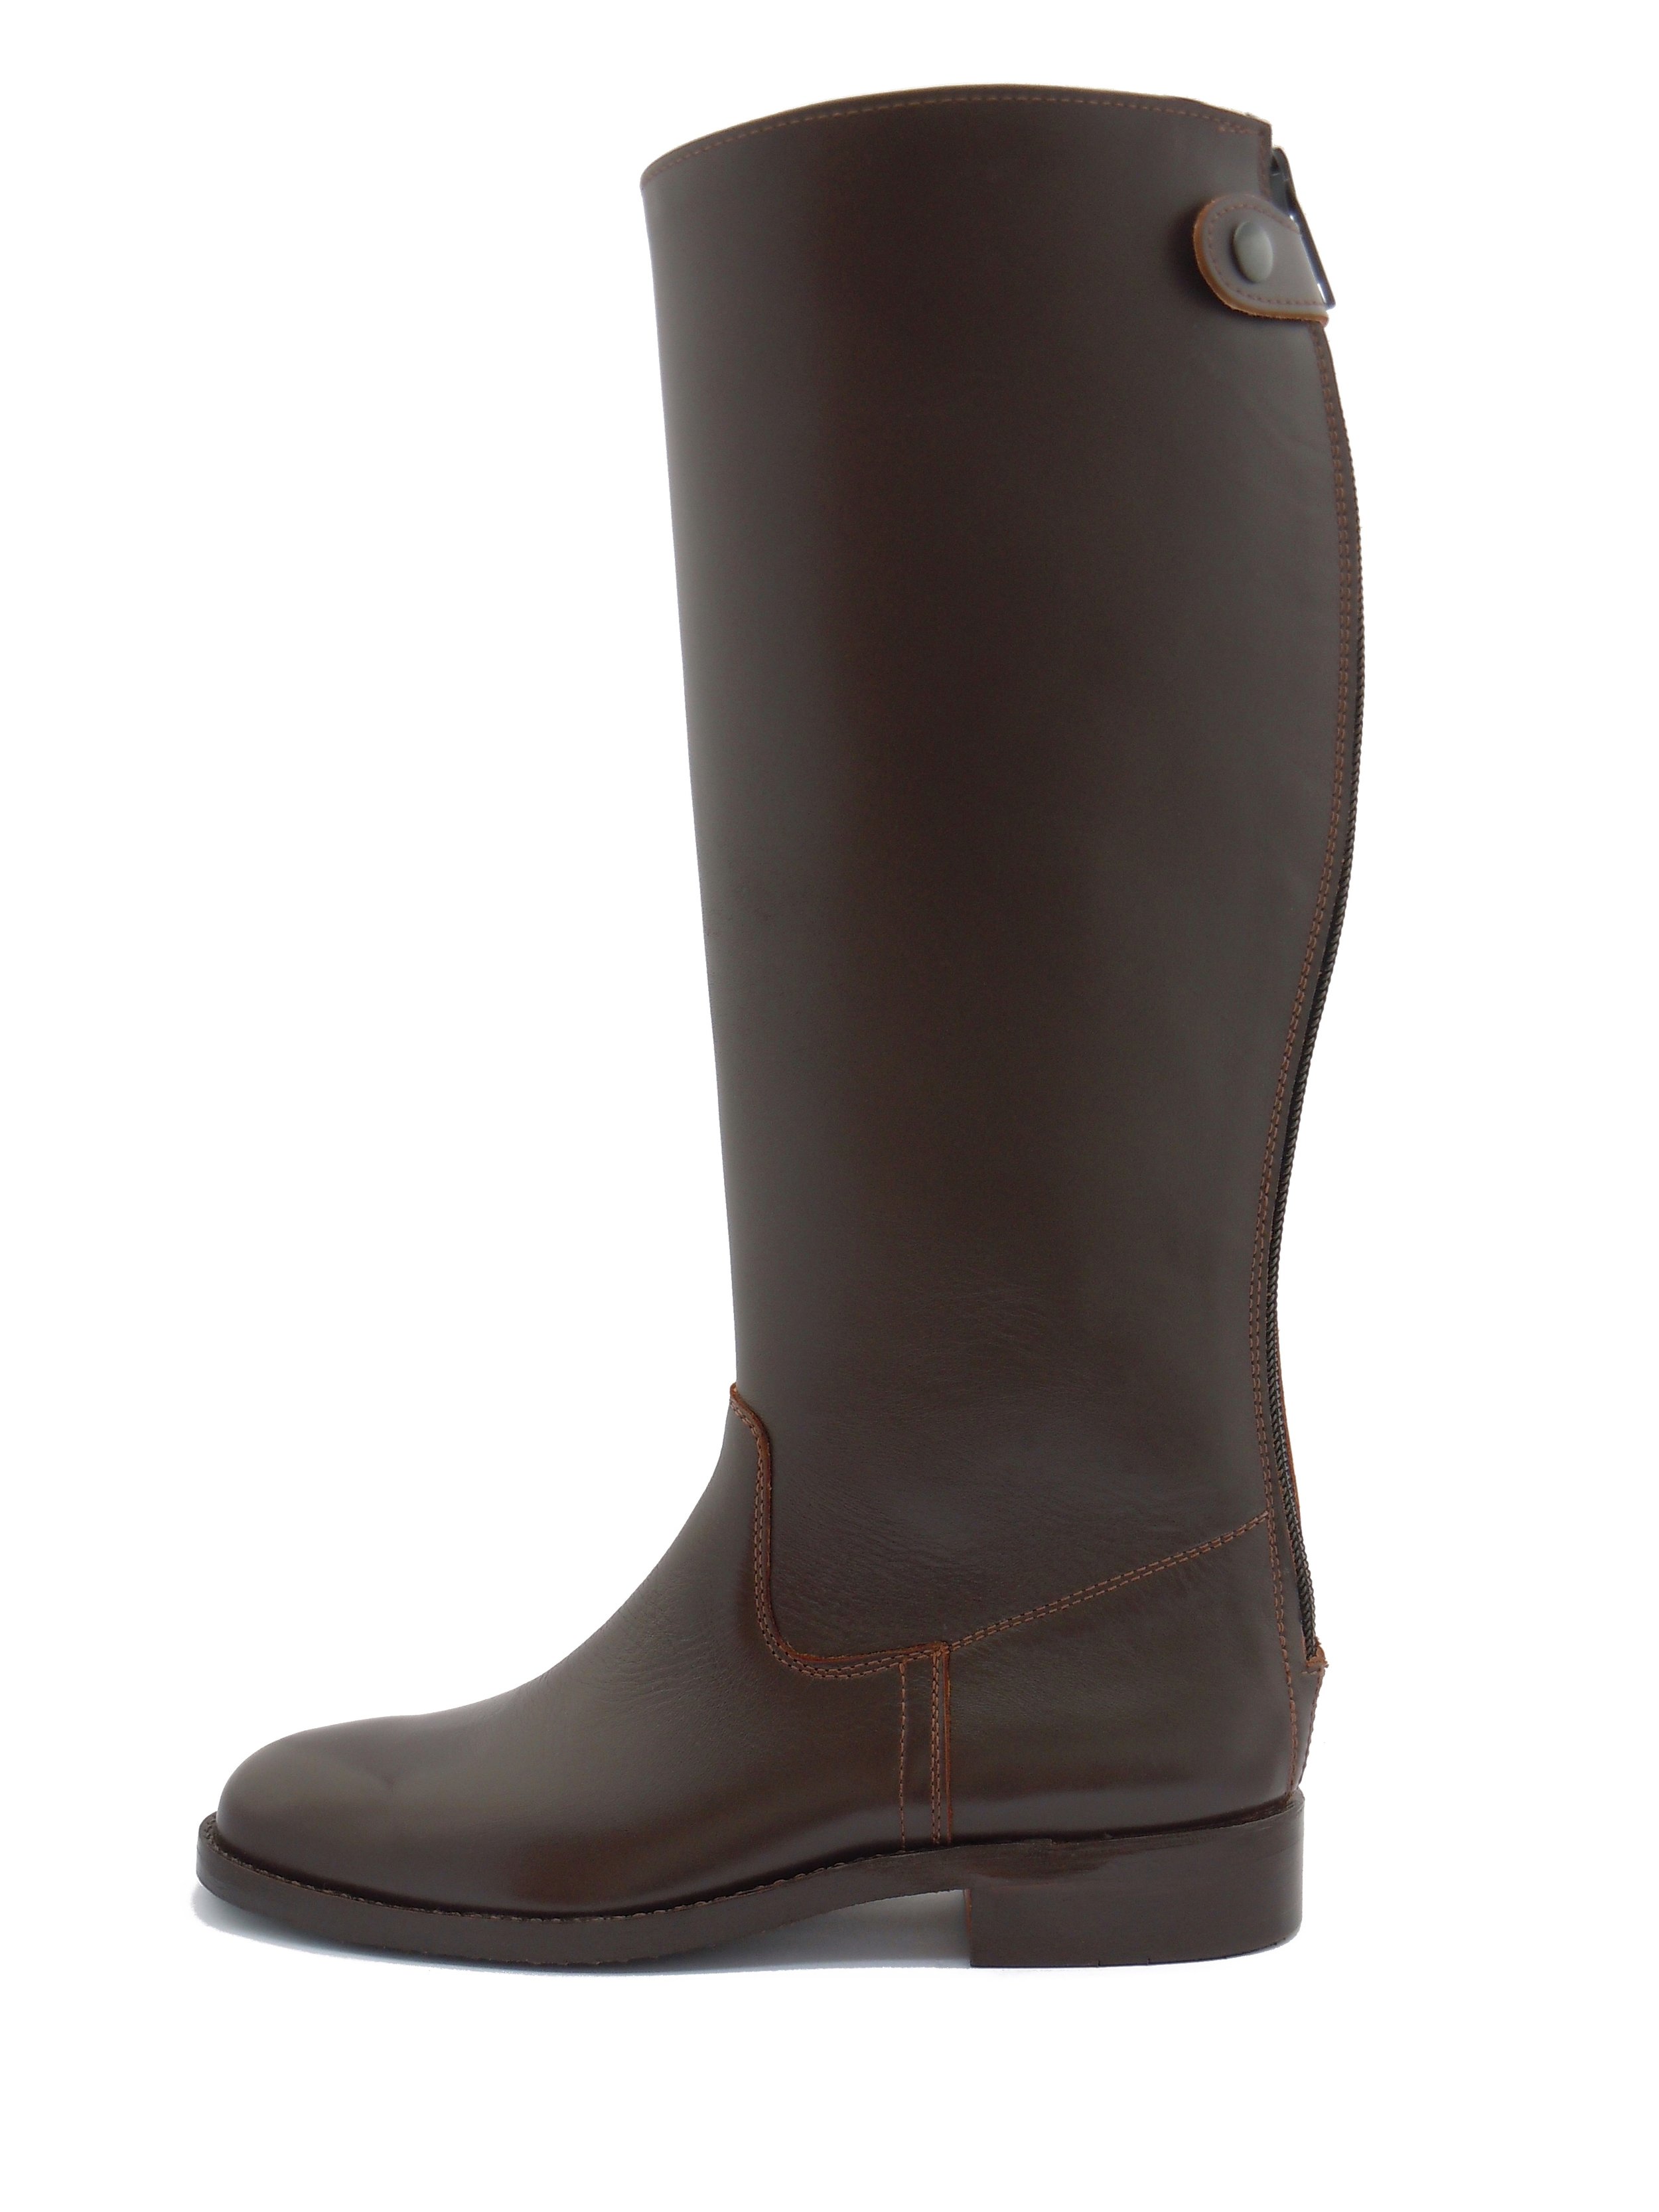 Polocrosse Boots with Curved Tops (Zip-Up)